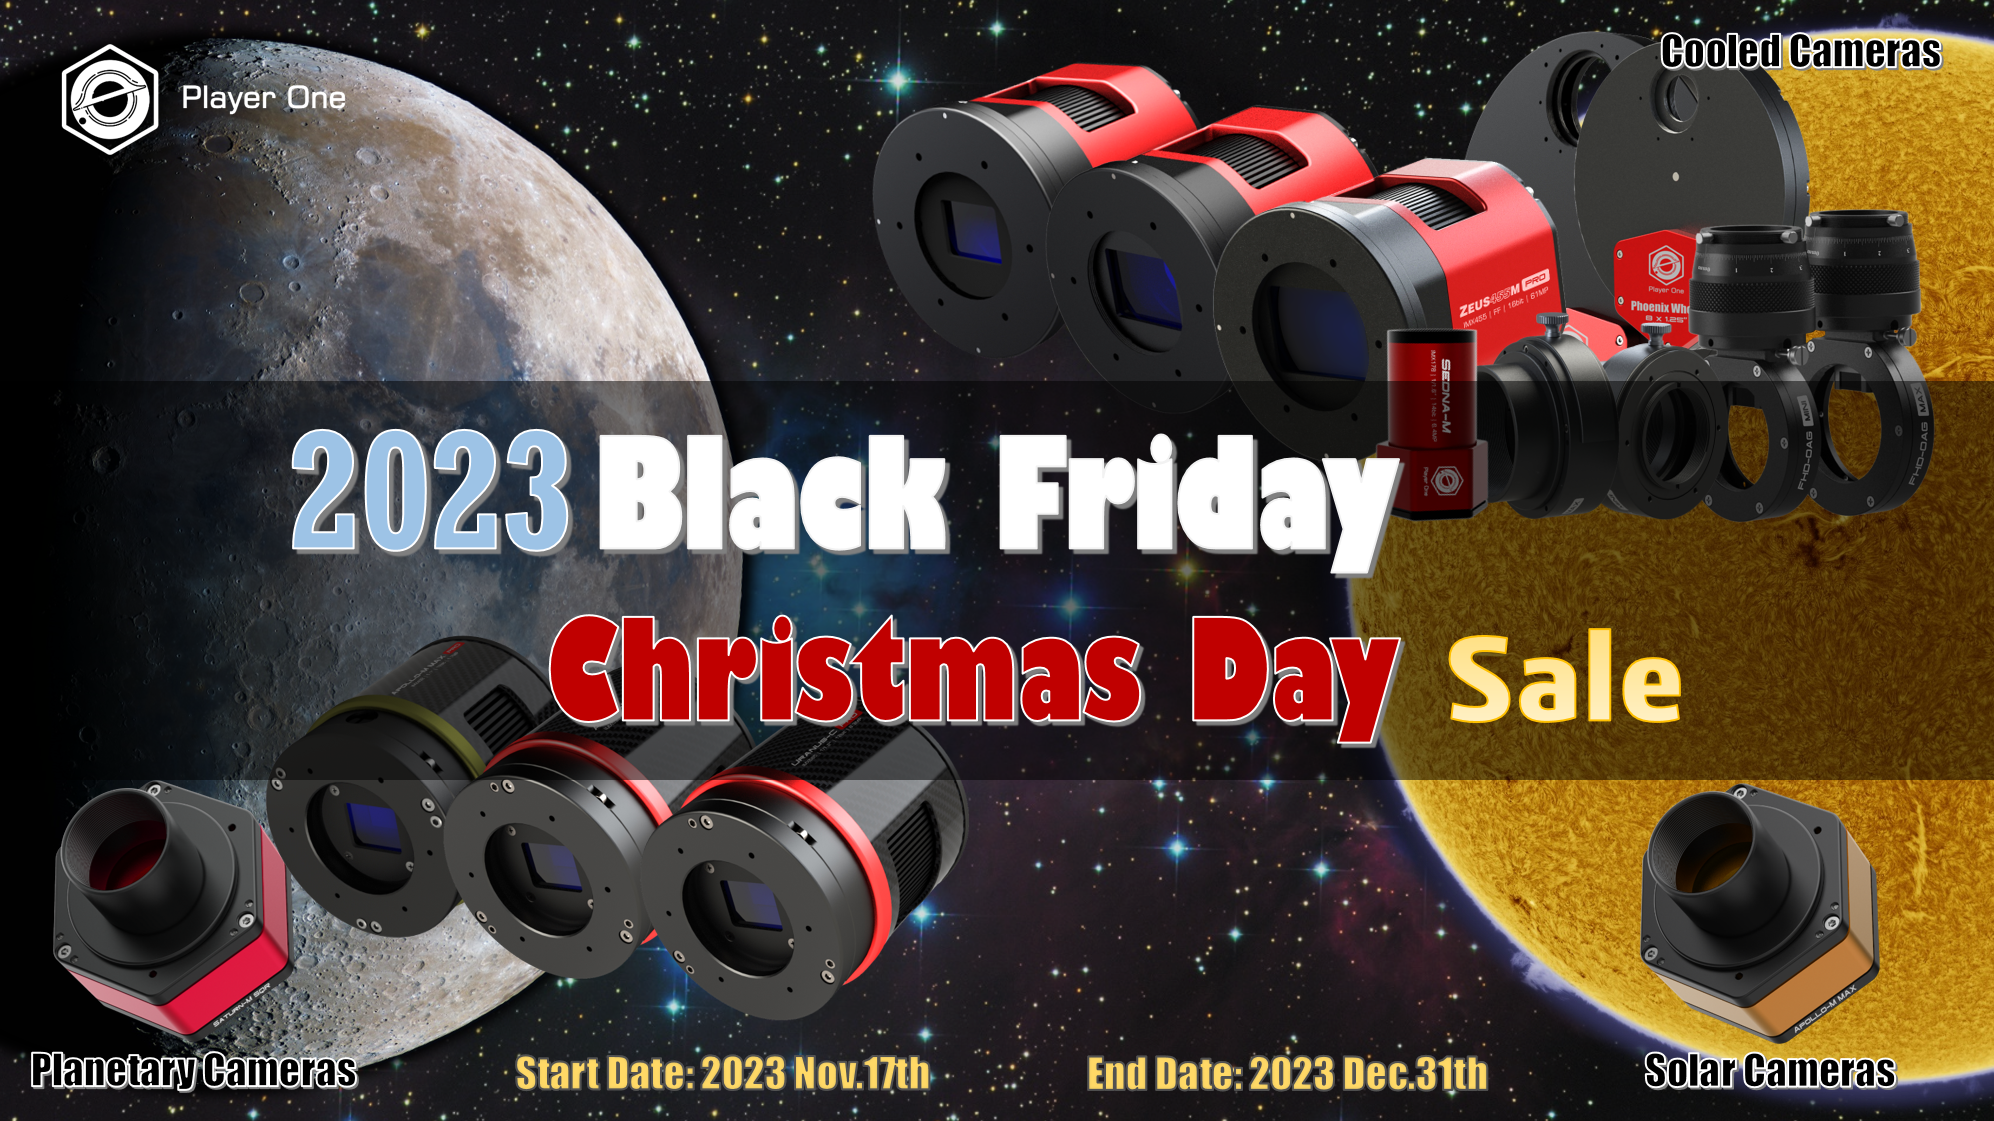 Black Friday and Christmas Sale 2023 START!